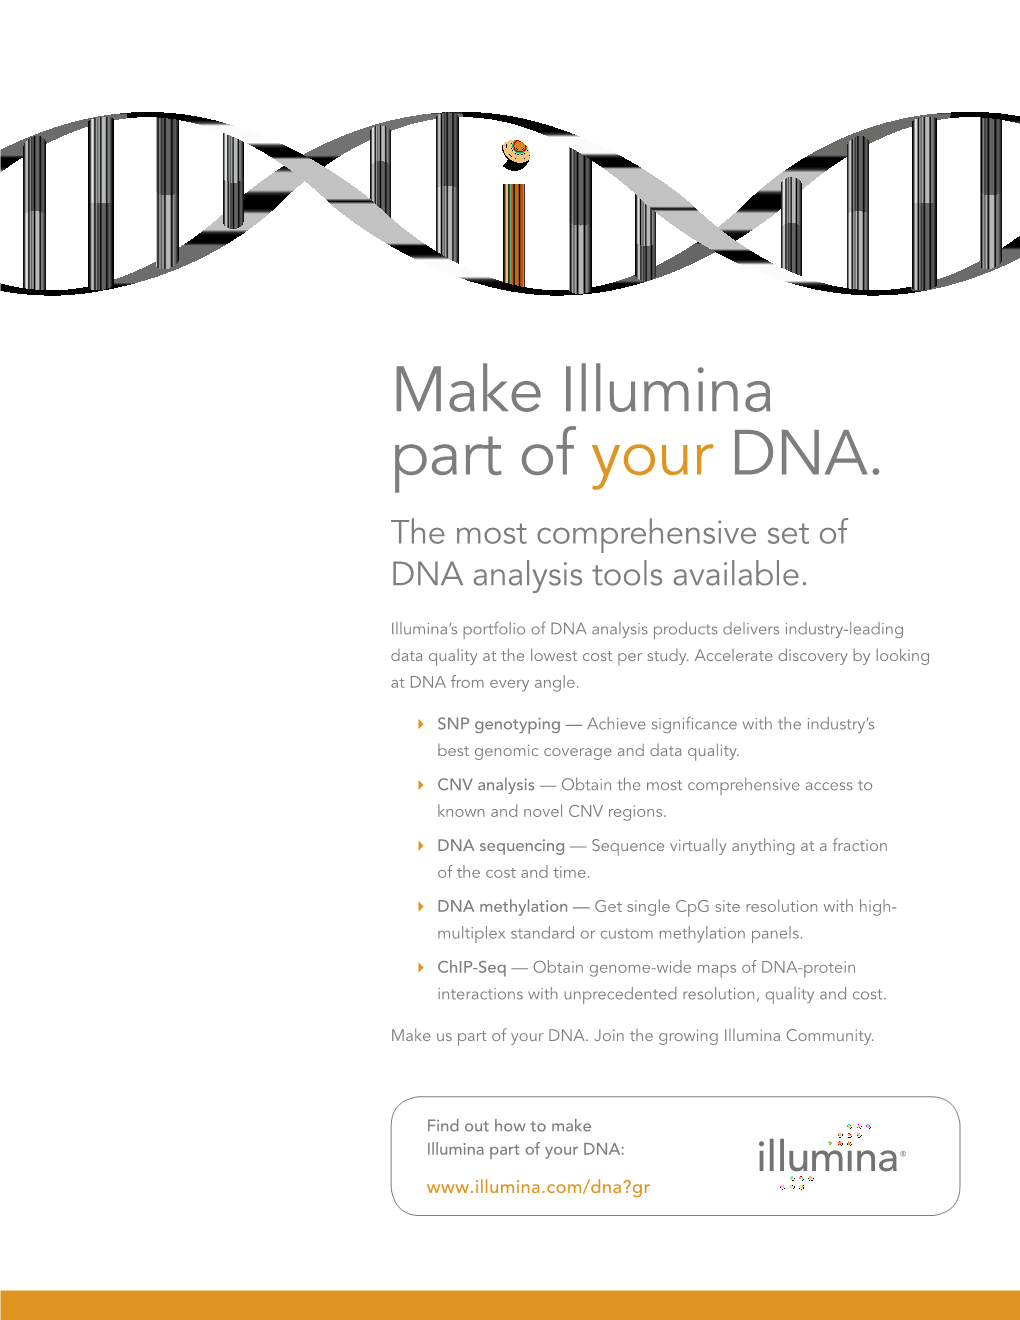 Make Illumina Part of Your DNA. the Most Comprehensive Set of DNA Analysis Tools Available